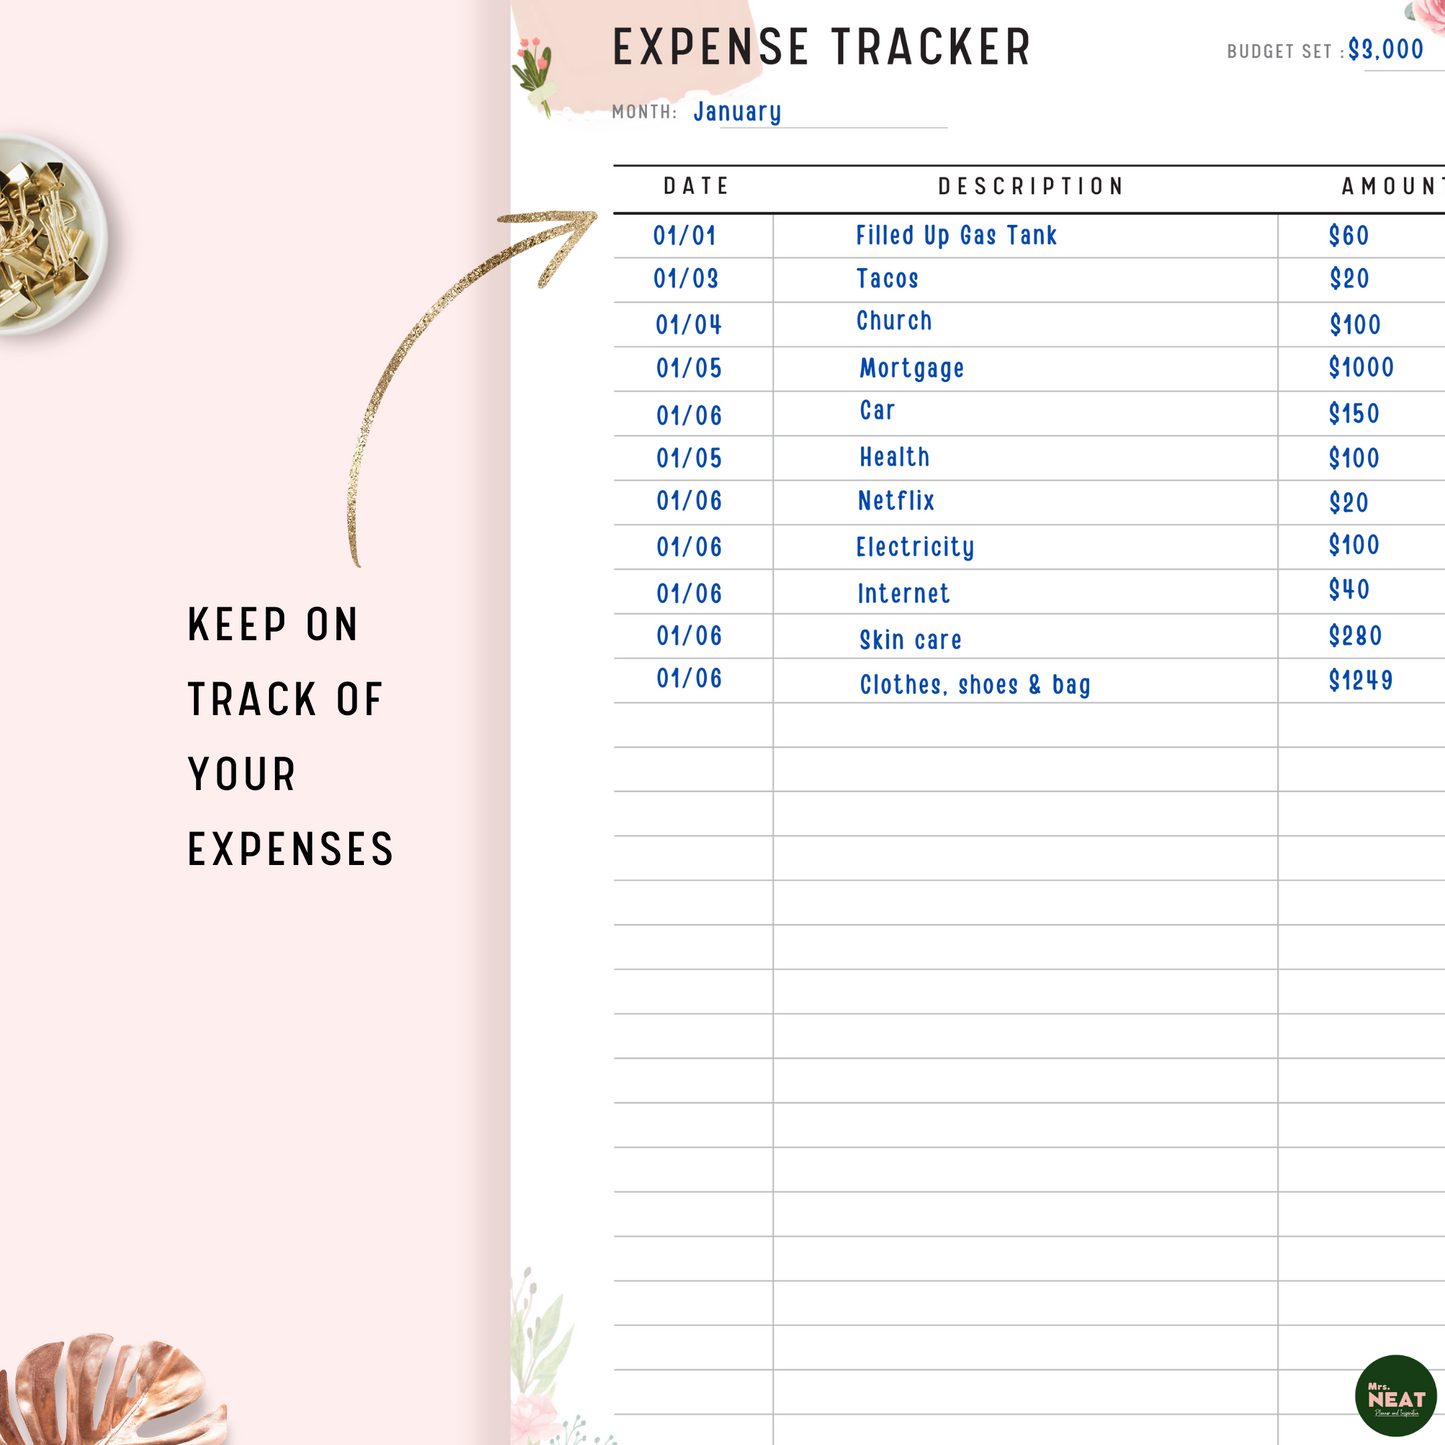 Floral Expense Planner with monthly expense projected and detail of list expenses